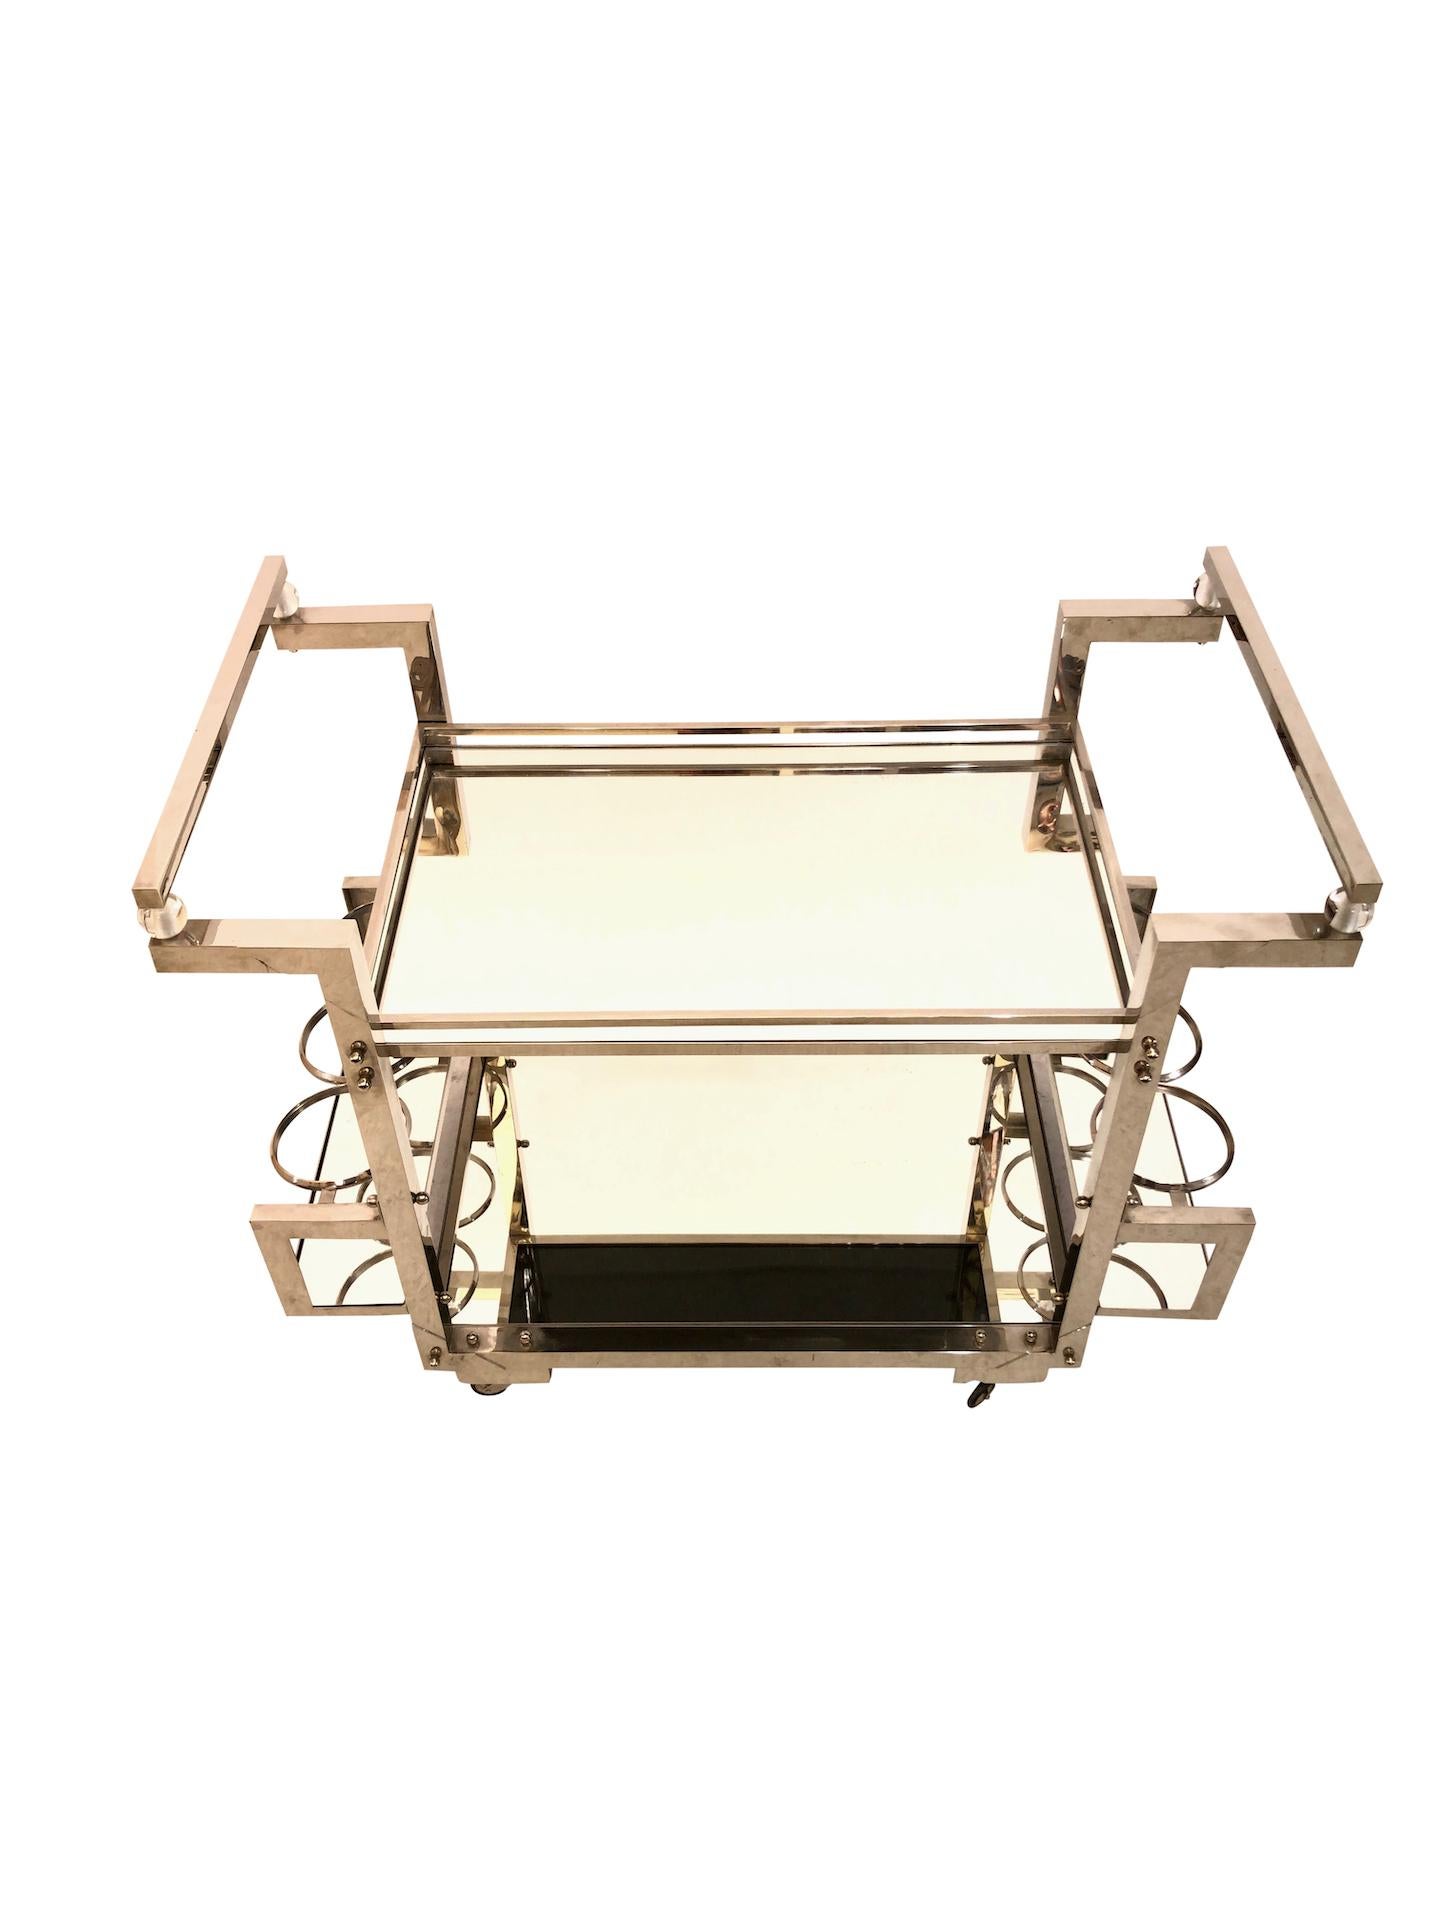 Polychromed Modernistic Art Deco Style Bar Trolley in Chromed Metal Made in Germany For Sale